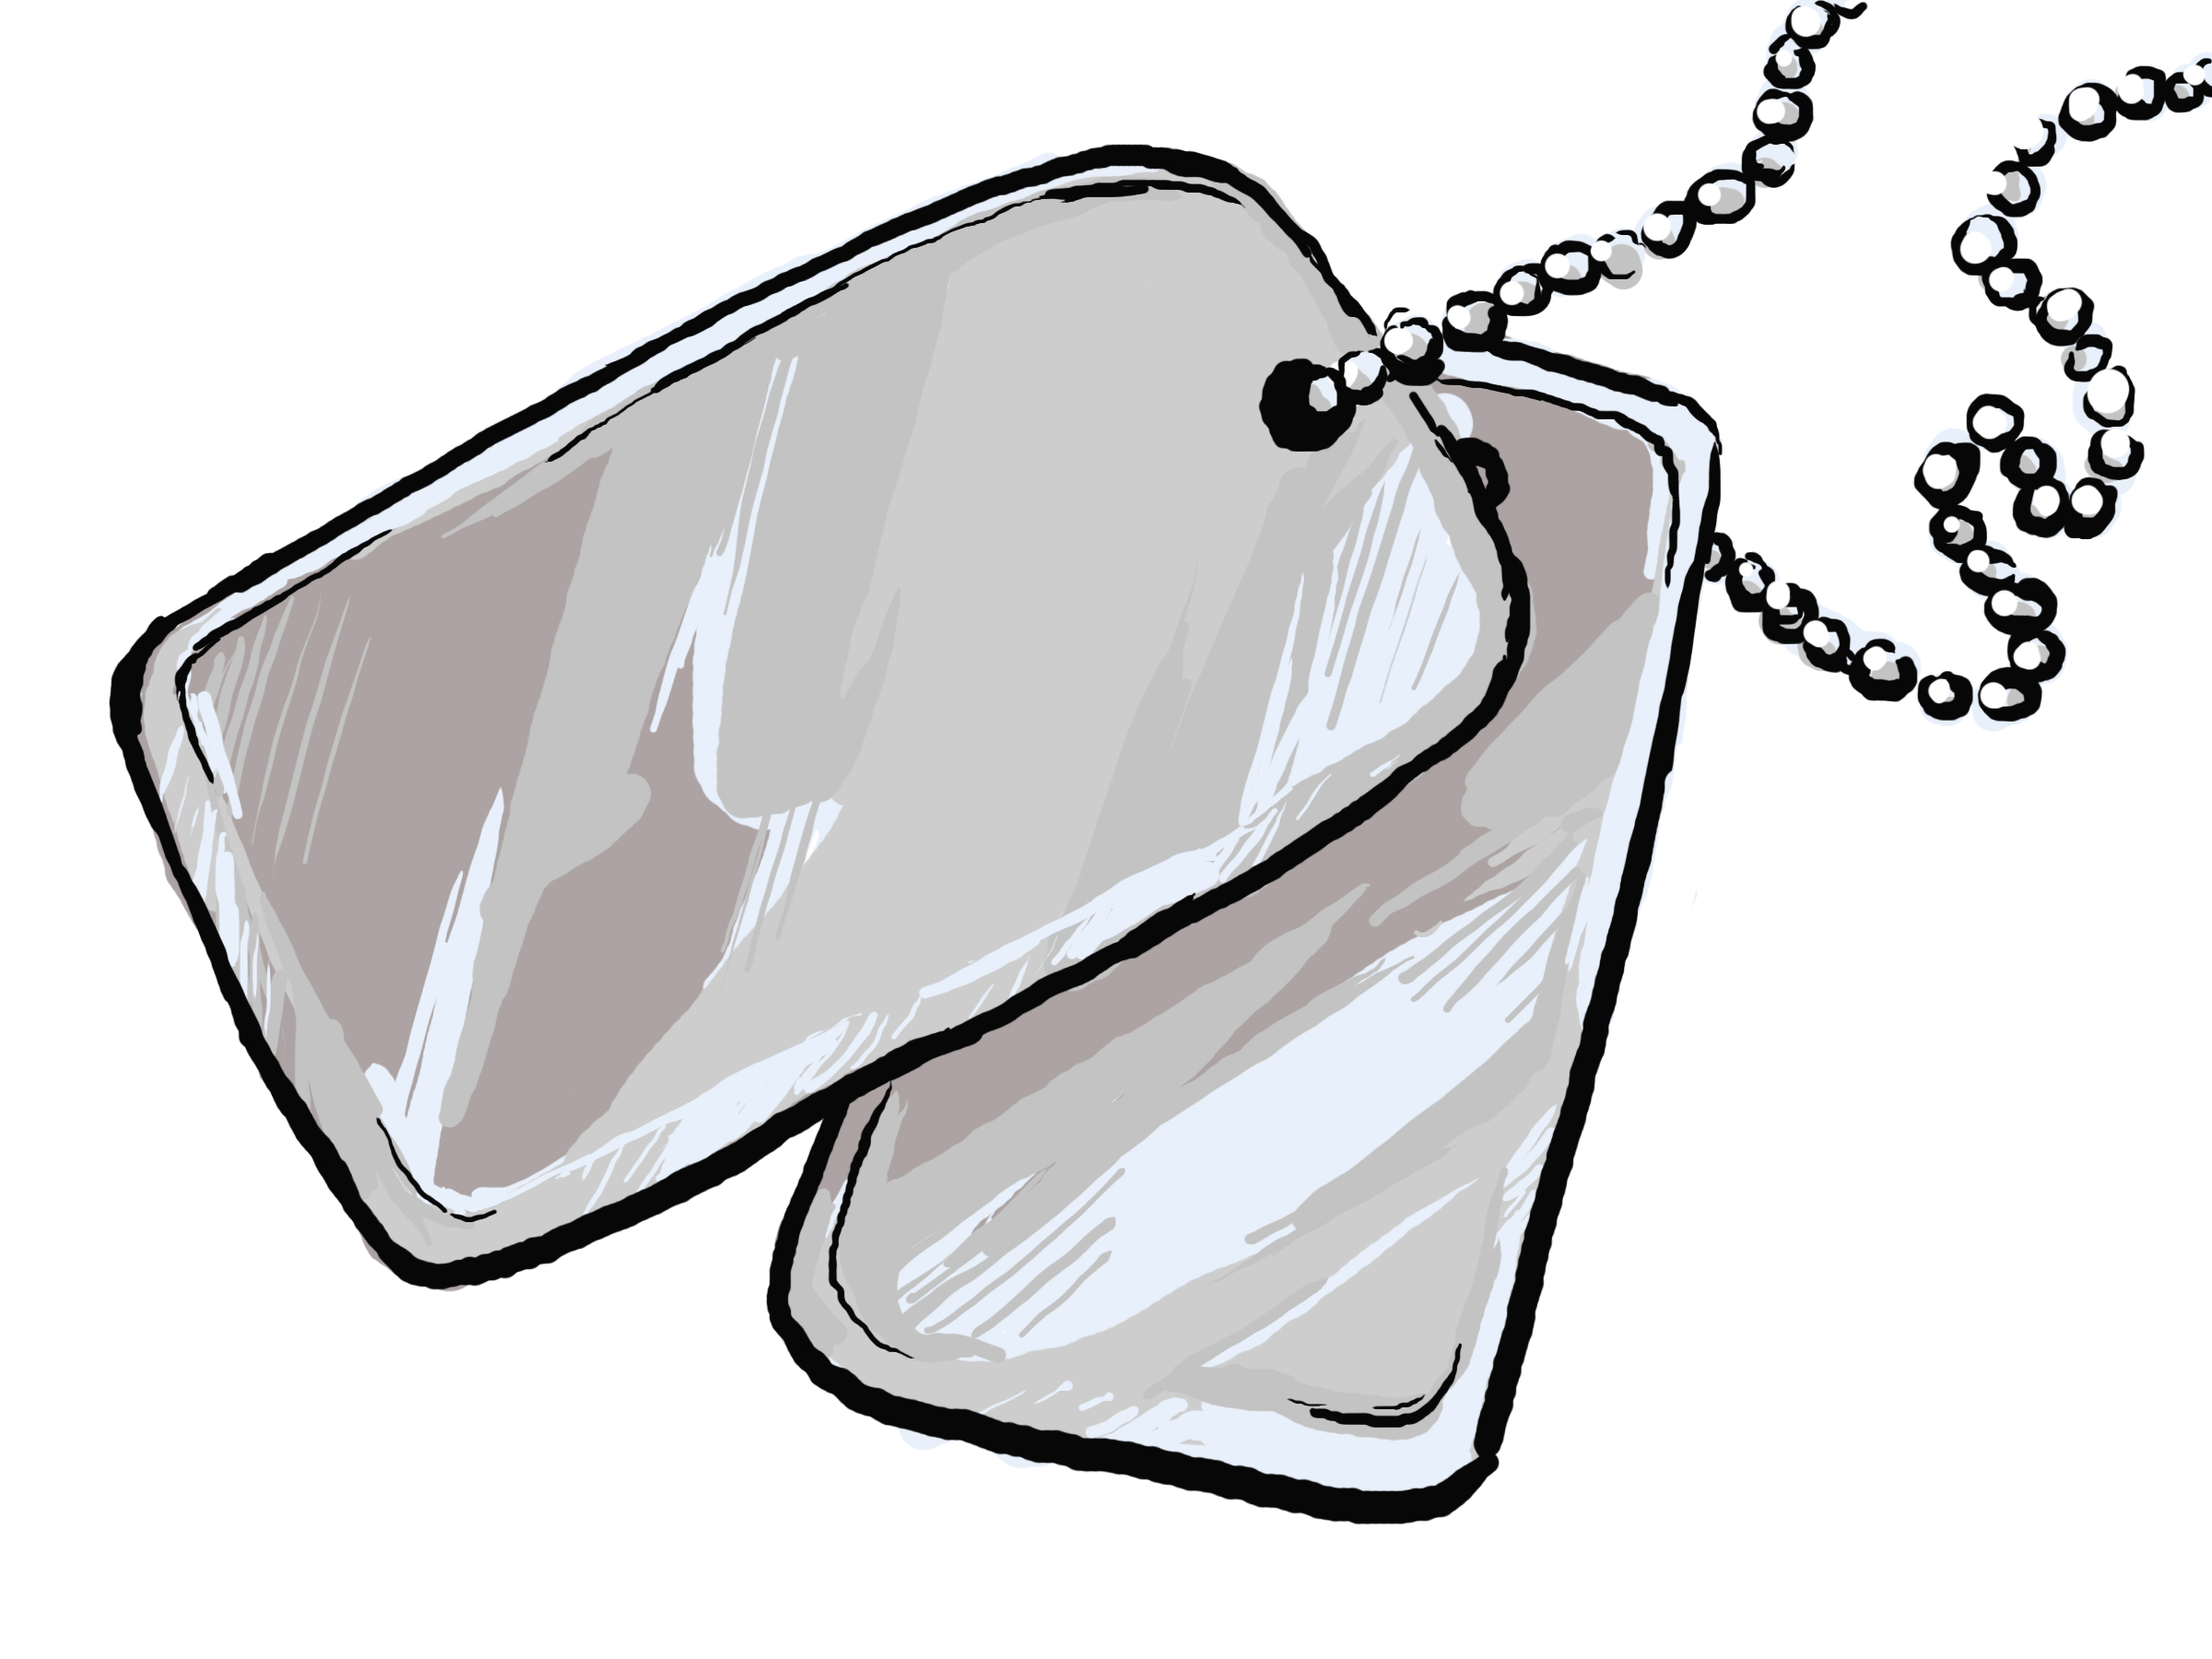 ... Dog tag - We see two vect